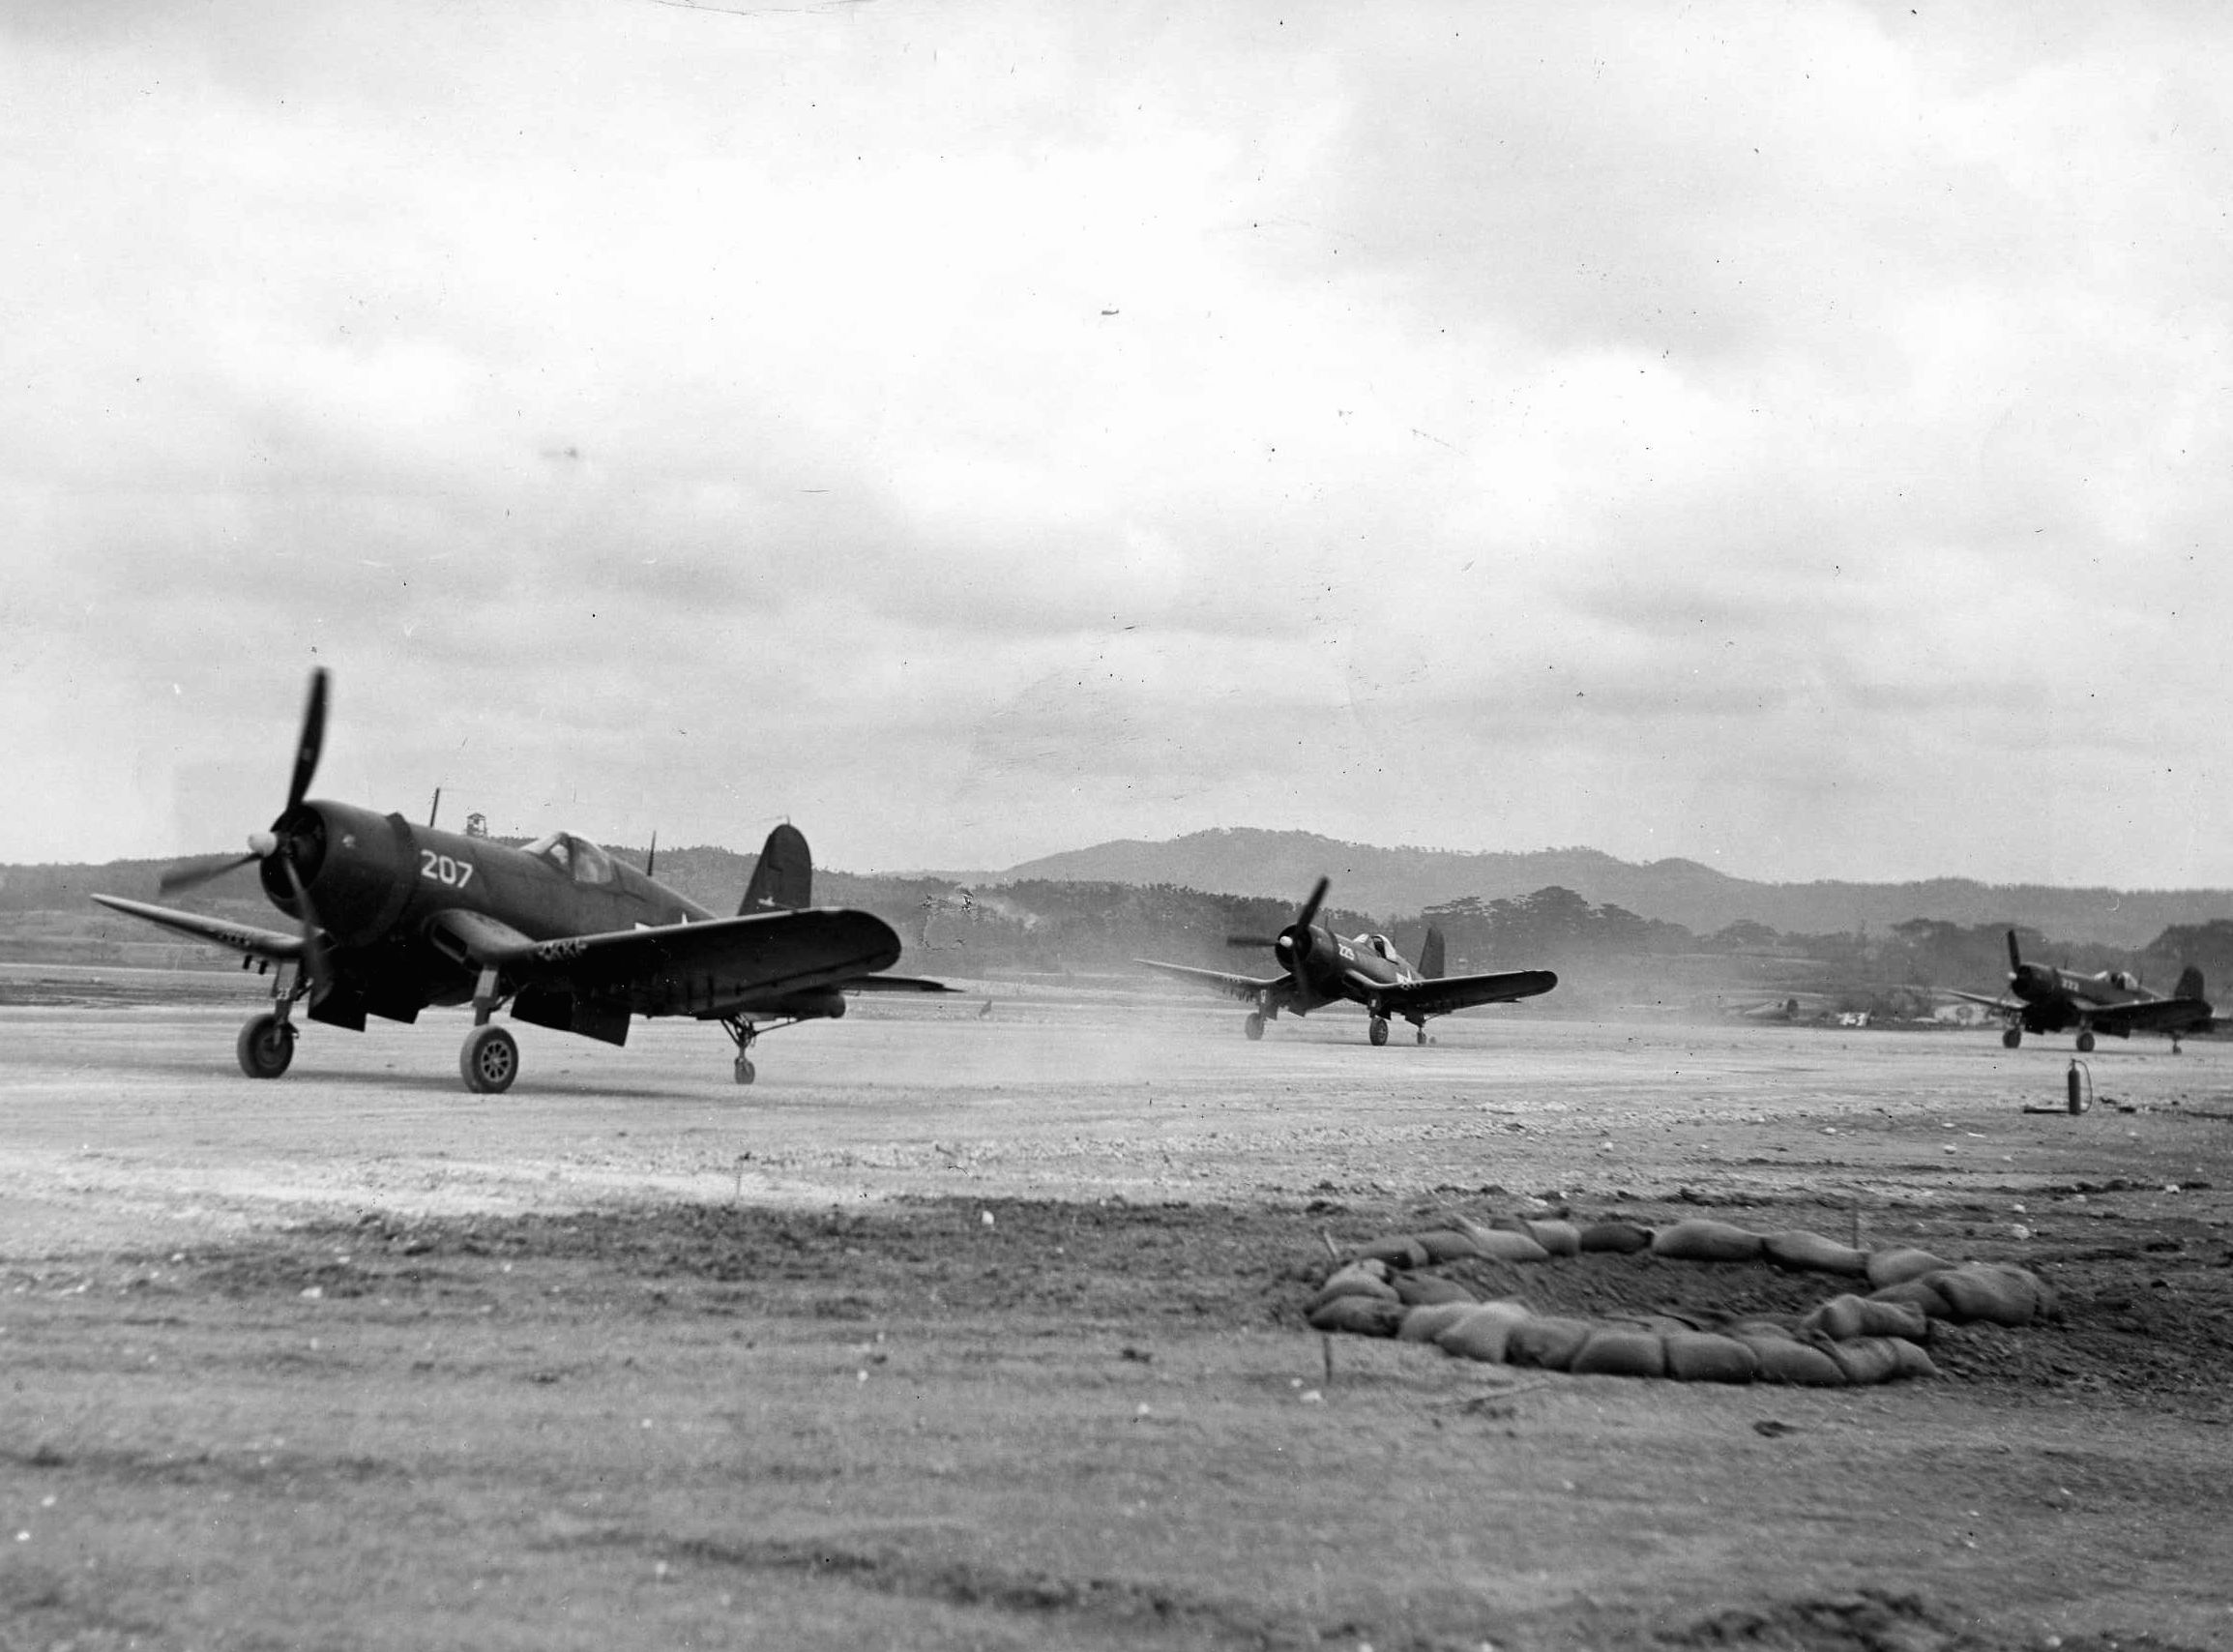 Vought F4U Corsair fighters line up for takeoff from Kodena Airfield on Okinawa on April 18, 1945. The Corsair remains one of the most famous fighter aircraft of World War II.  (National Archives)